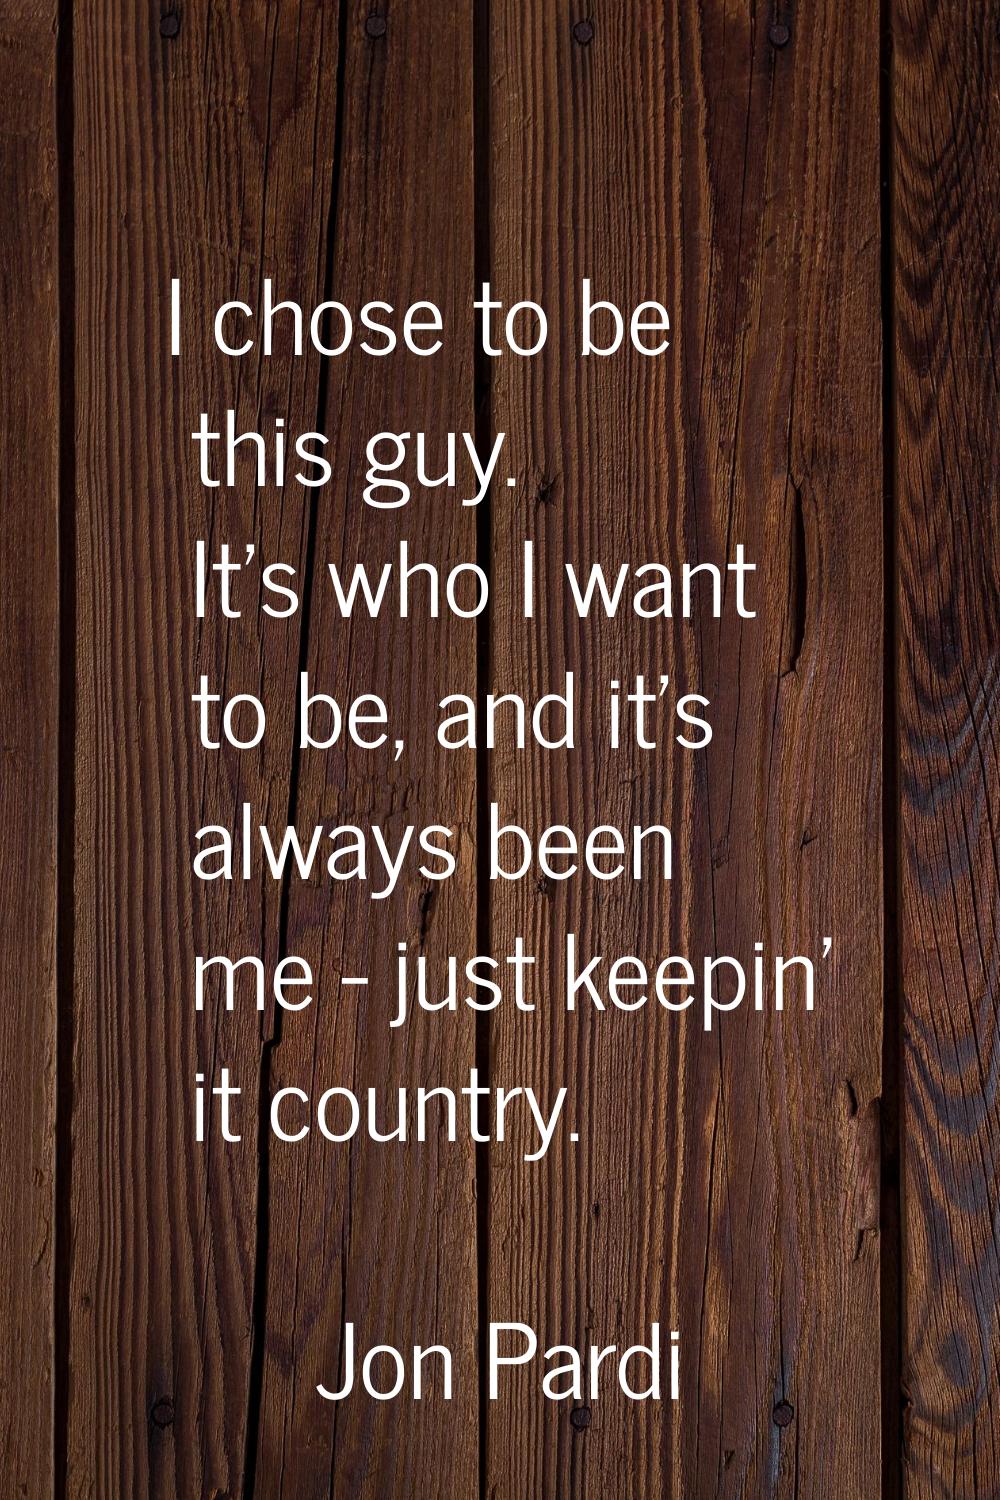 I chose to be this guy. It's who I want to be, and it's always been me - just keepin' it country.